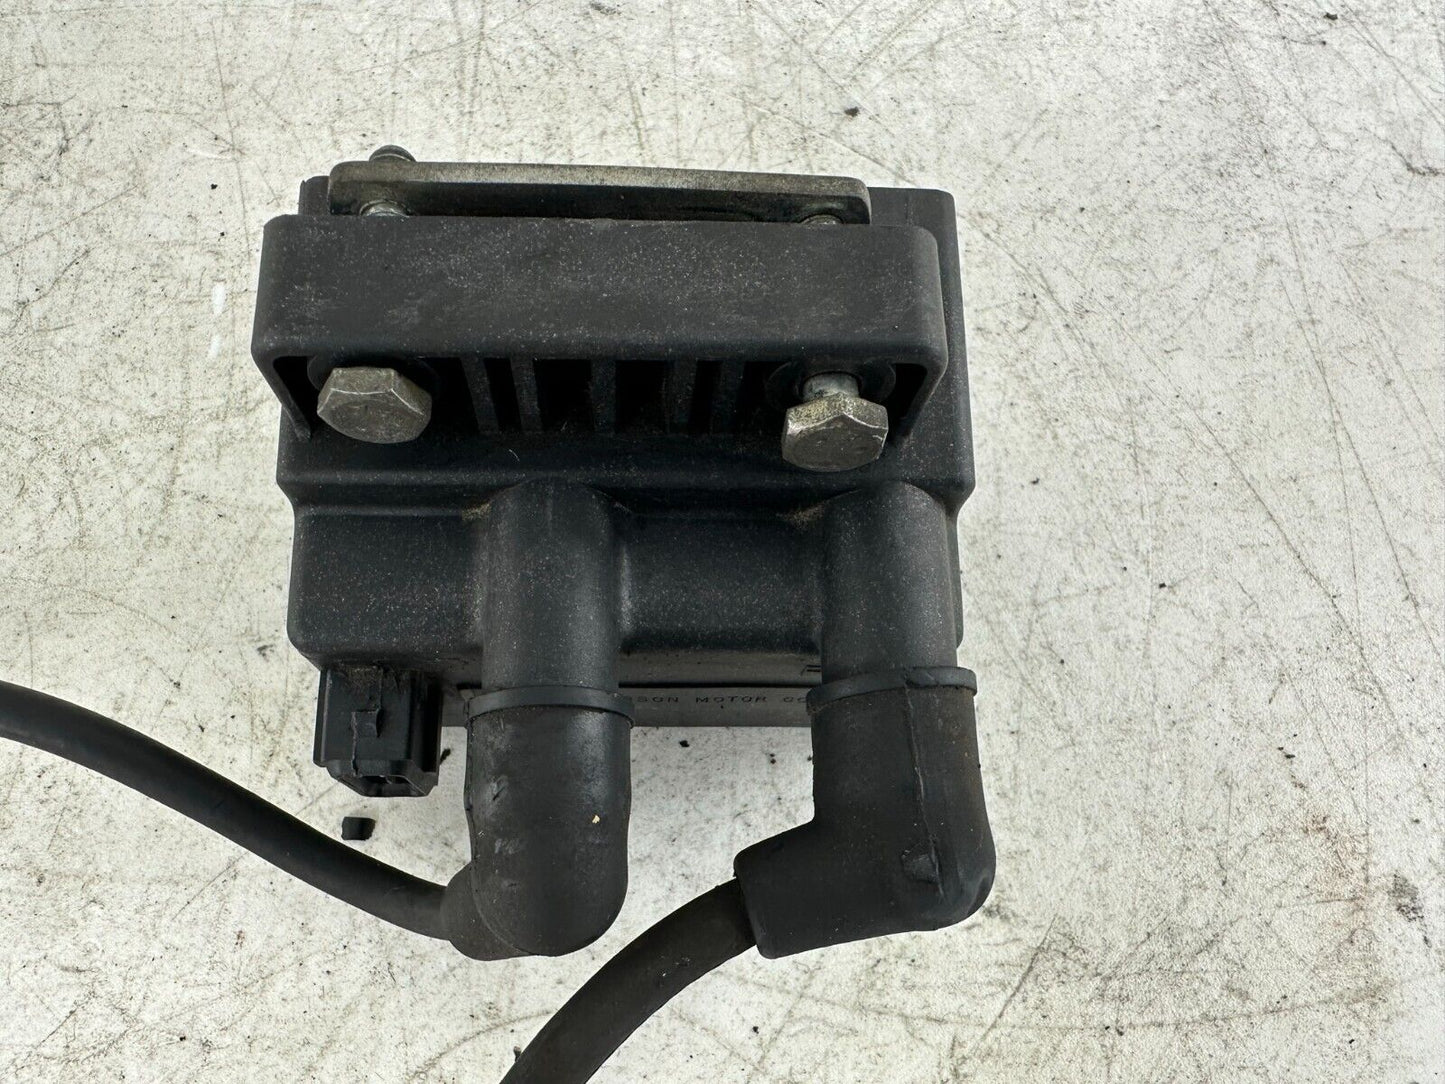 1996 HARLEY FLH ROADKING TOURING EFI Fuel Injected Ignition Coil & Wires